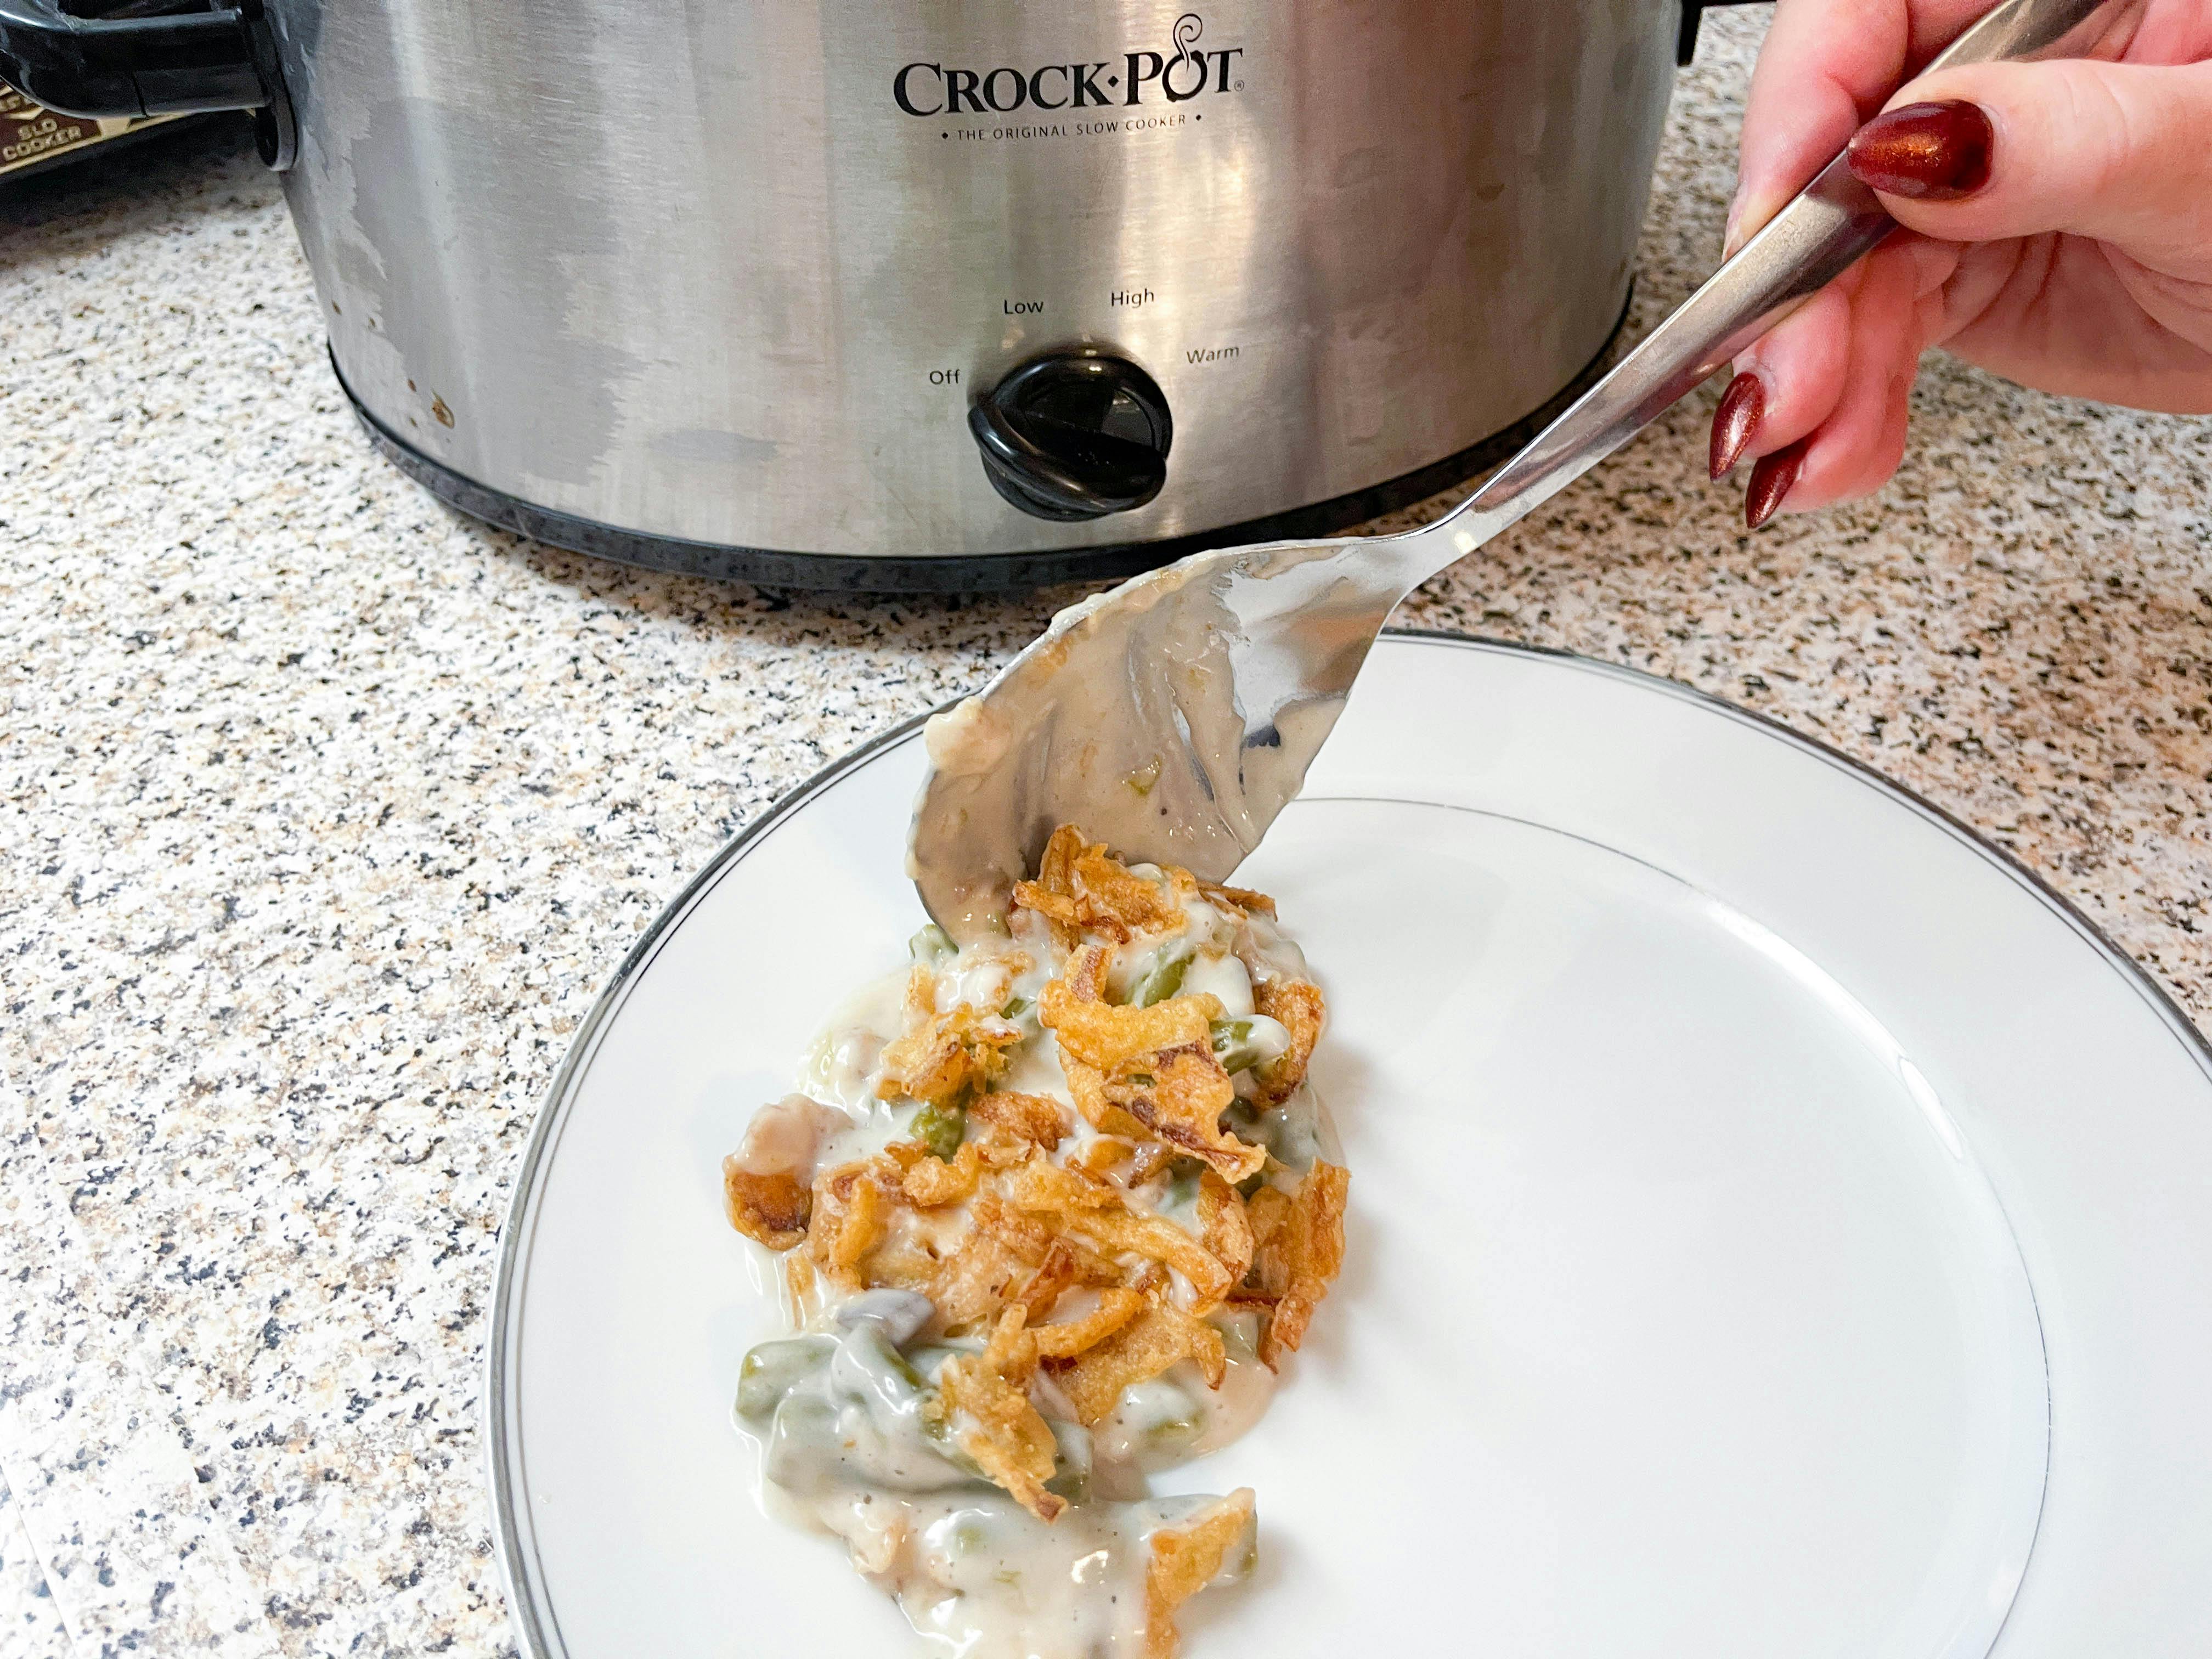 A spoon full of green beans casserole being put on a plate in front of a crock pot.